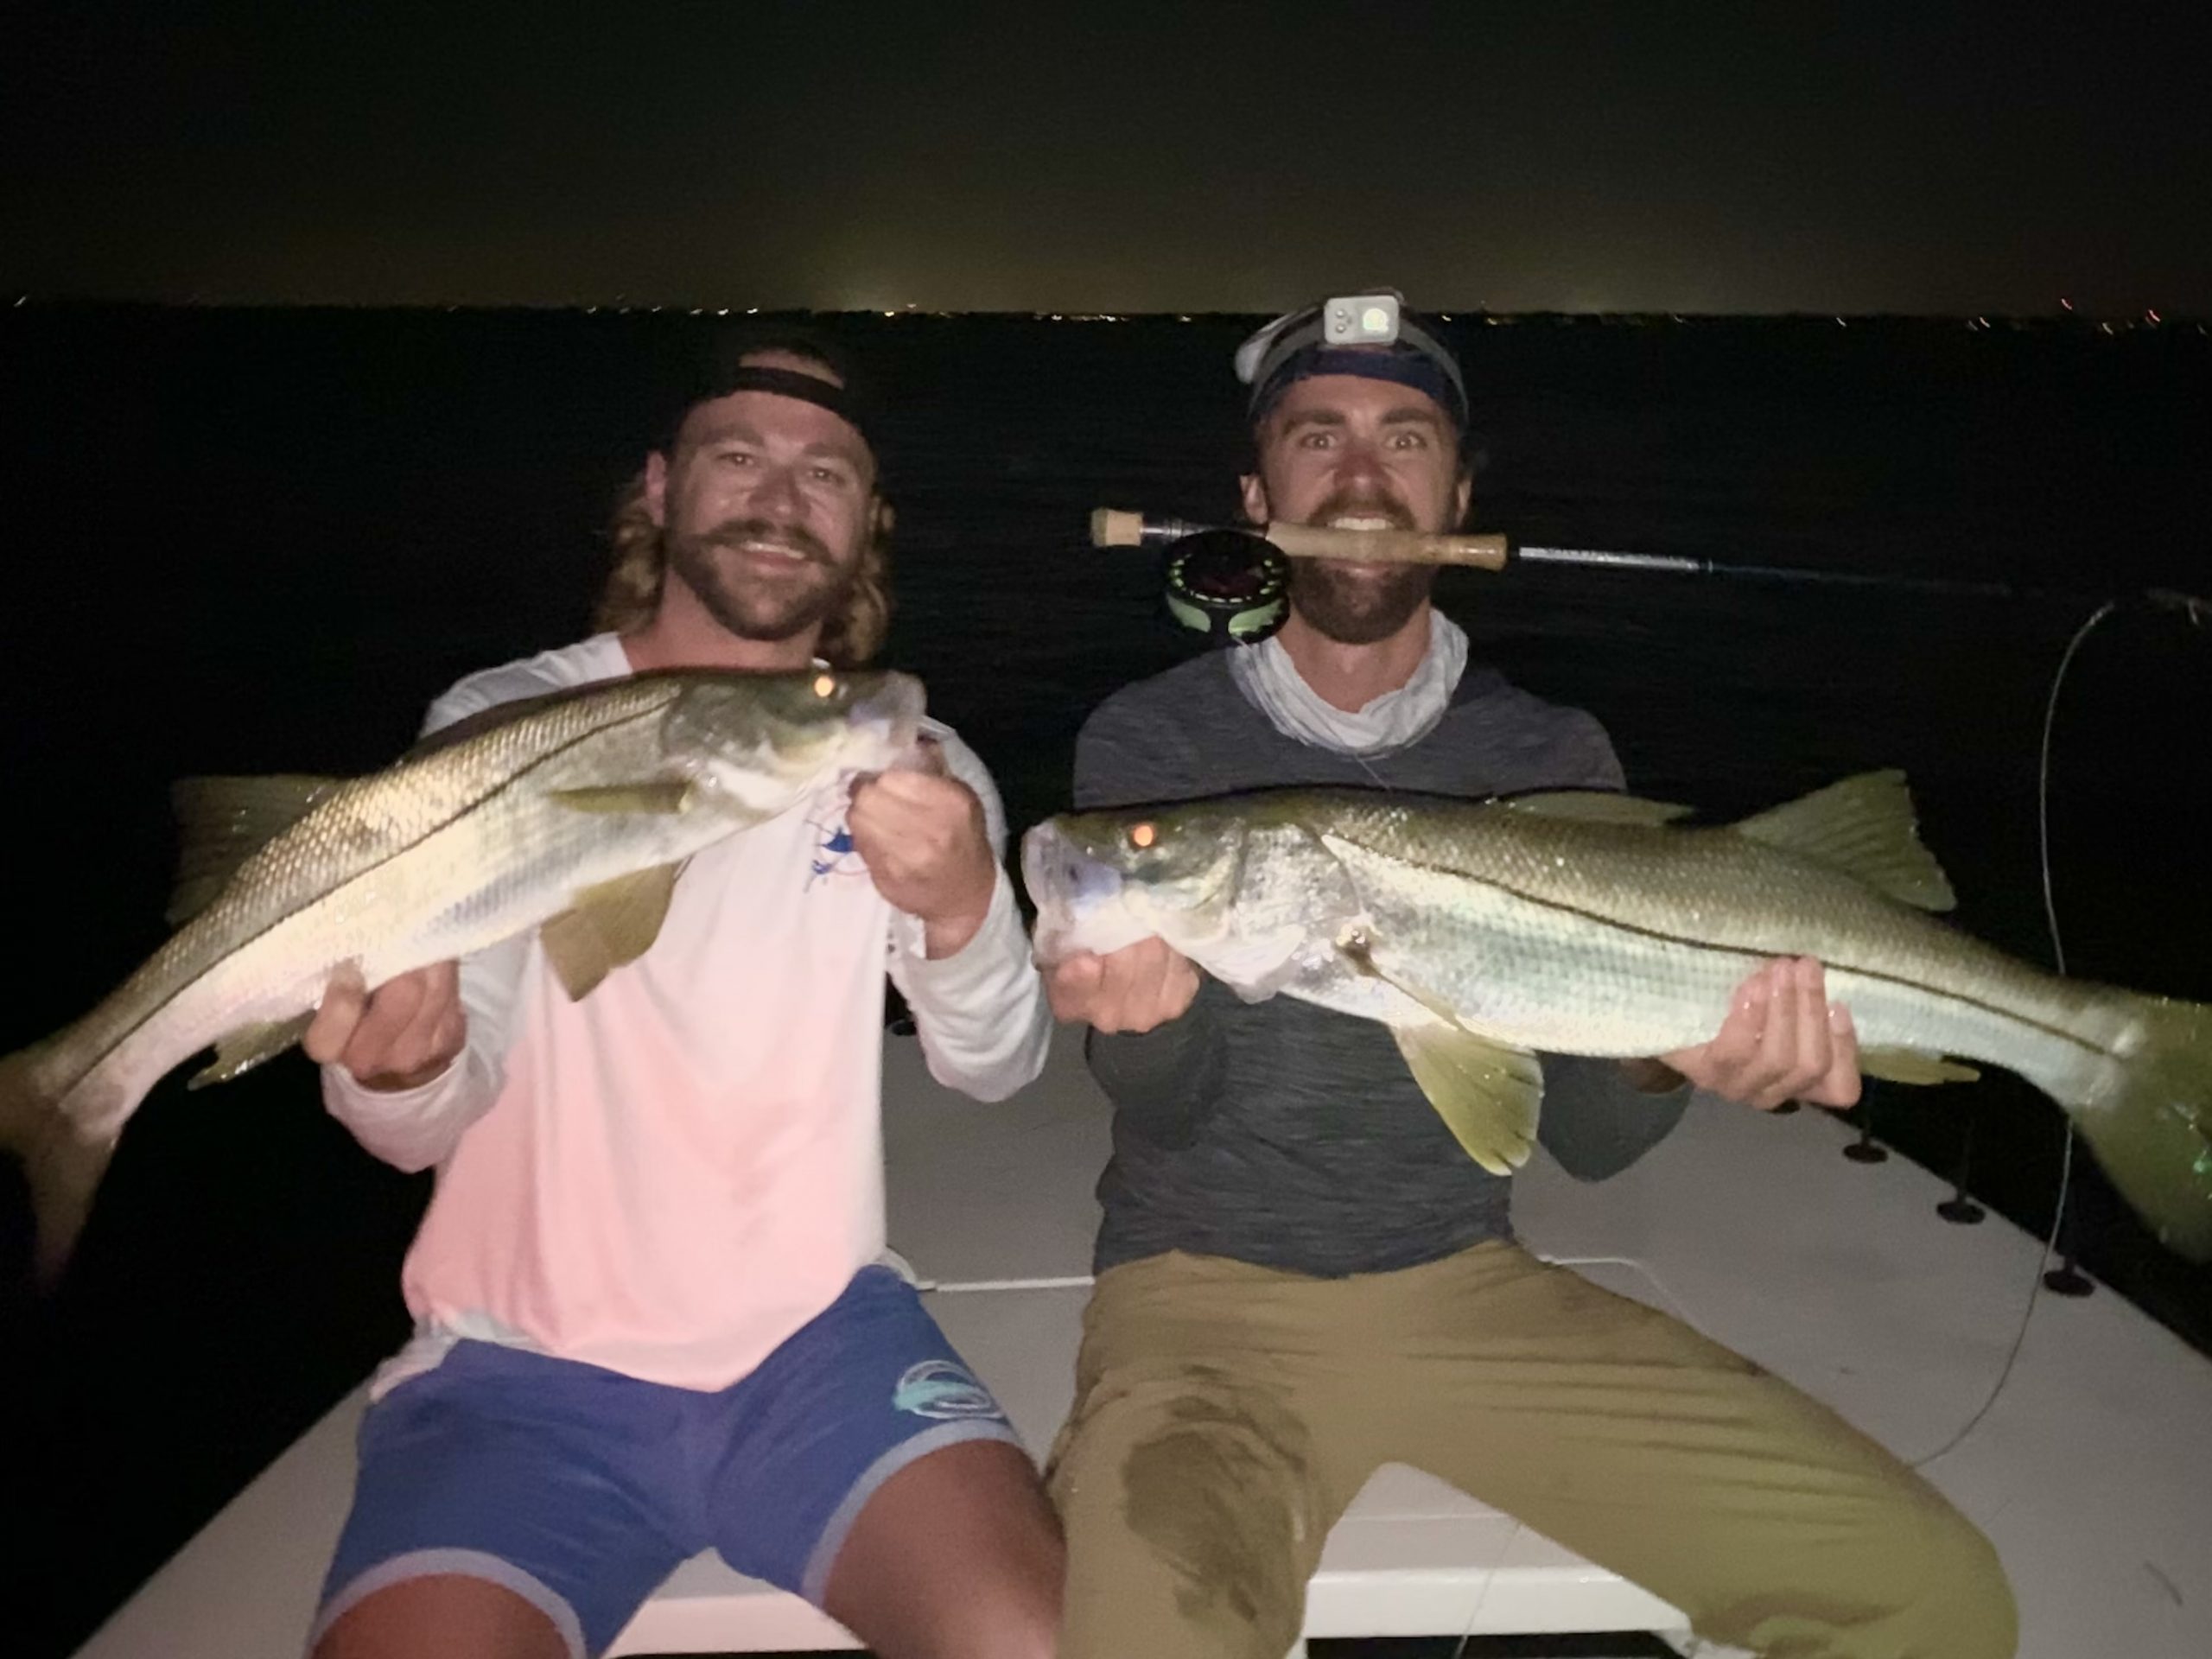 Two anglers hold snook up for the camera